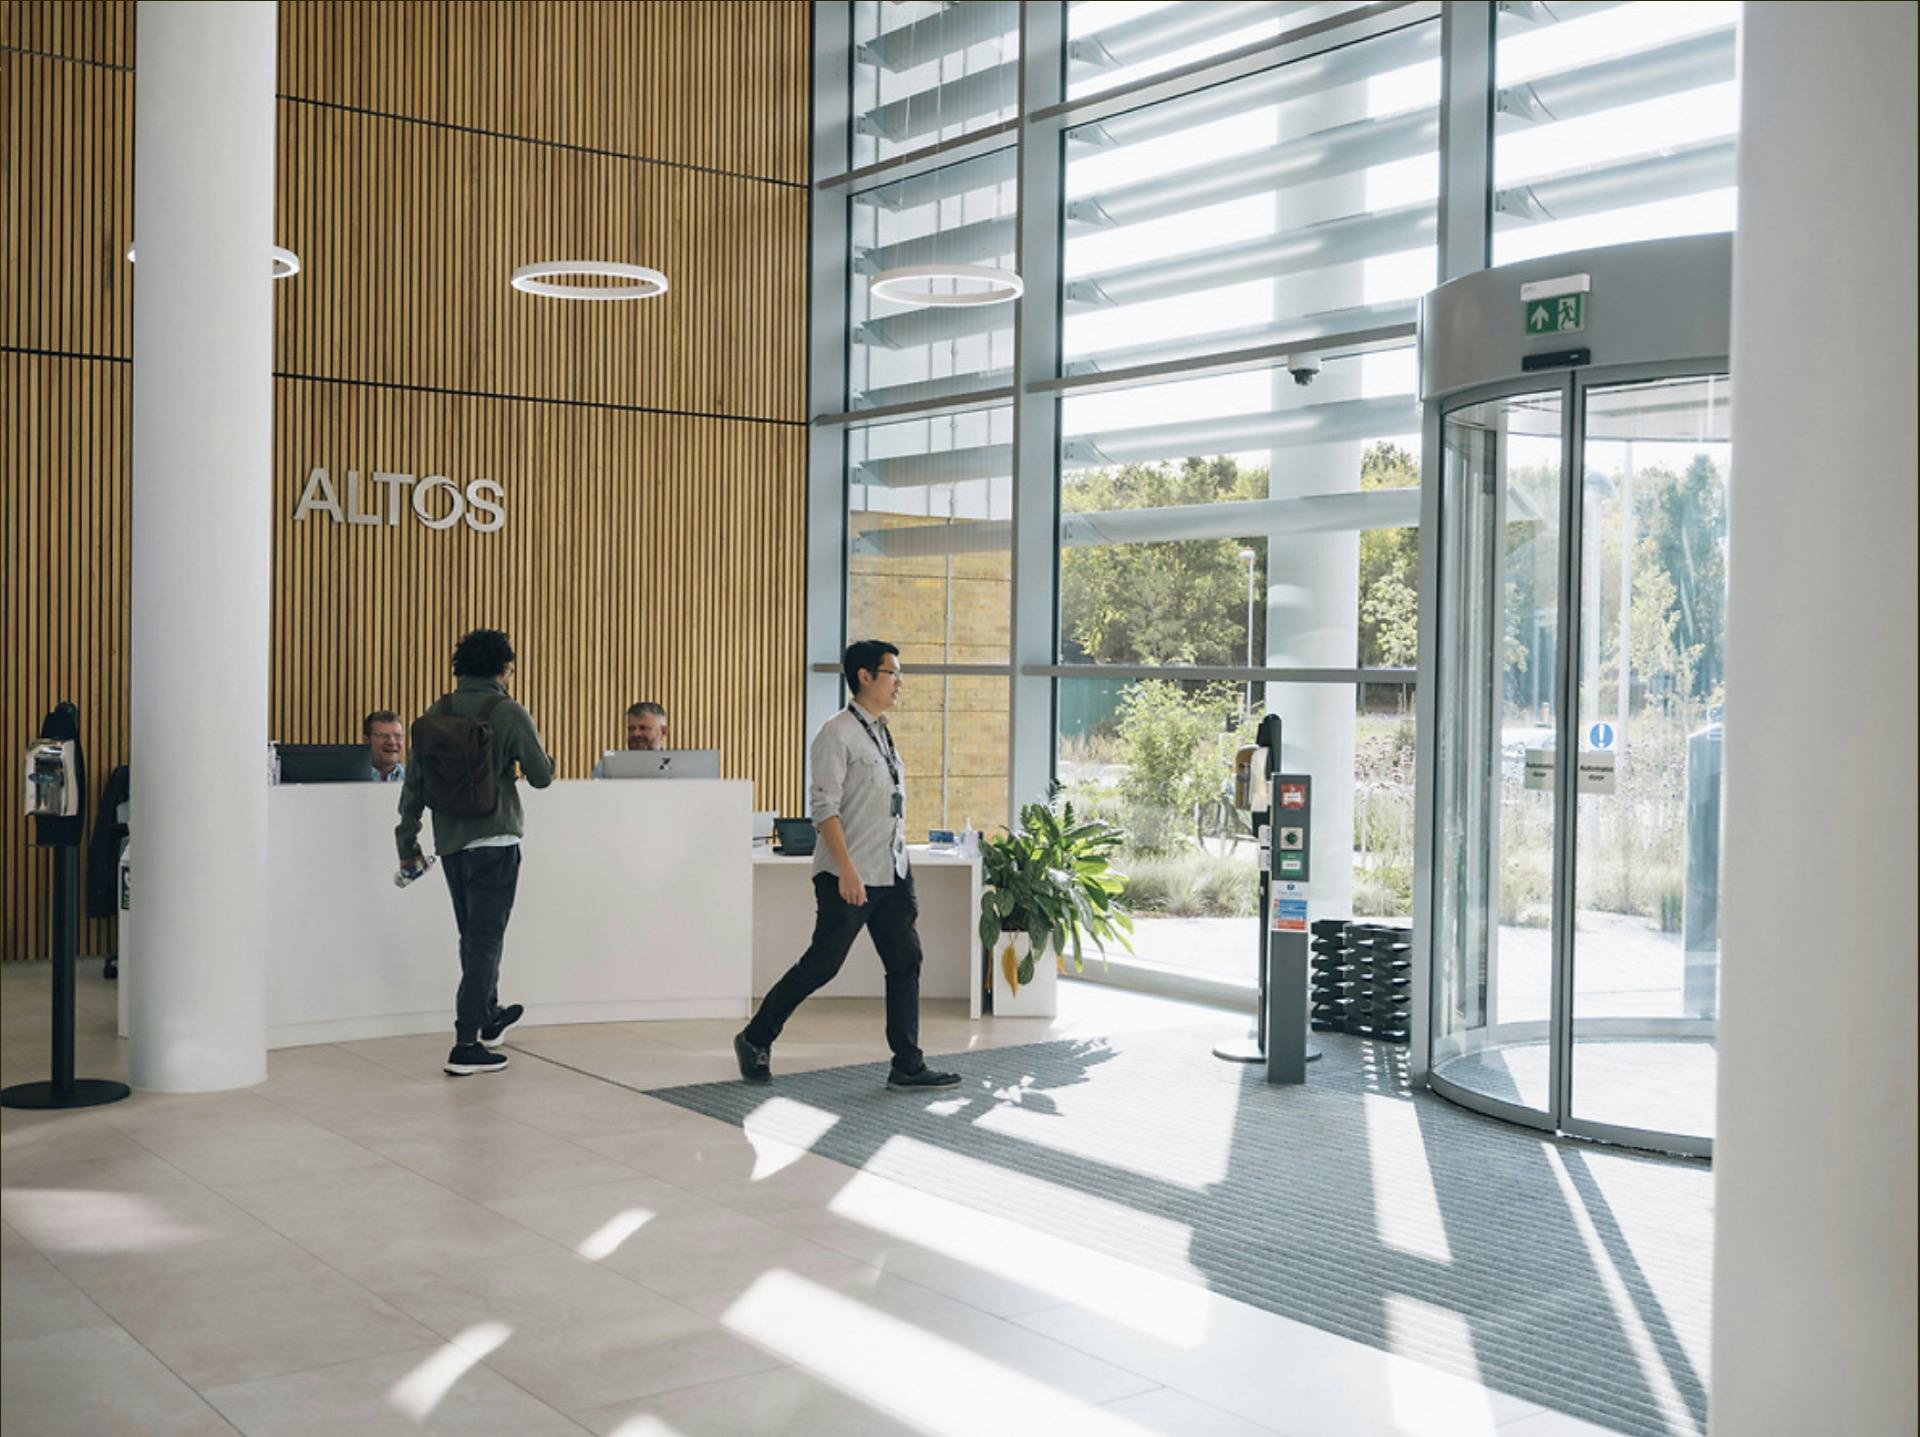 Stay up to date with Altos